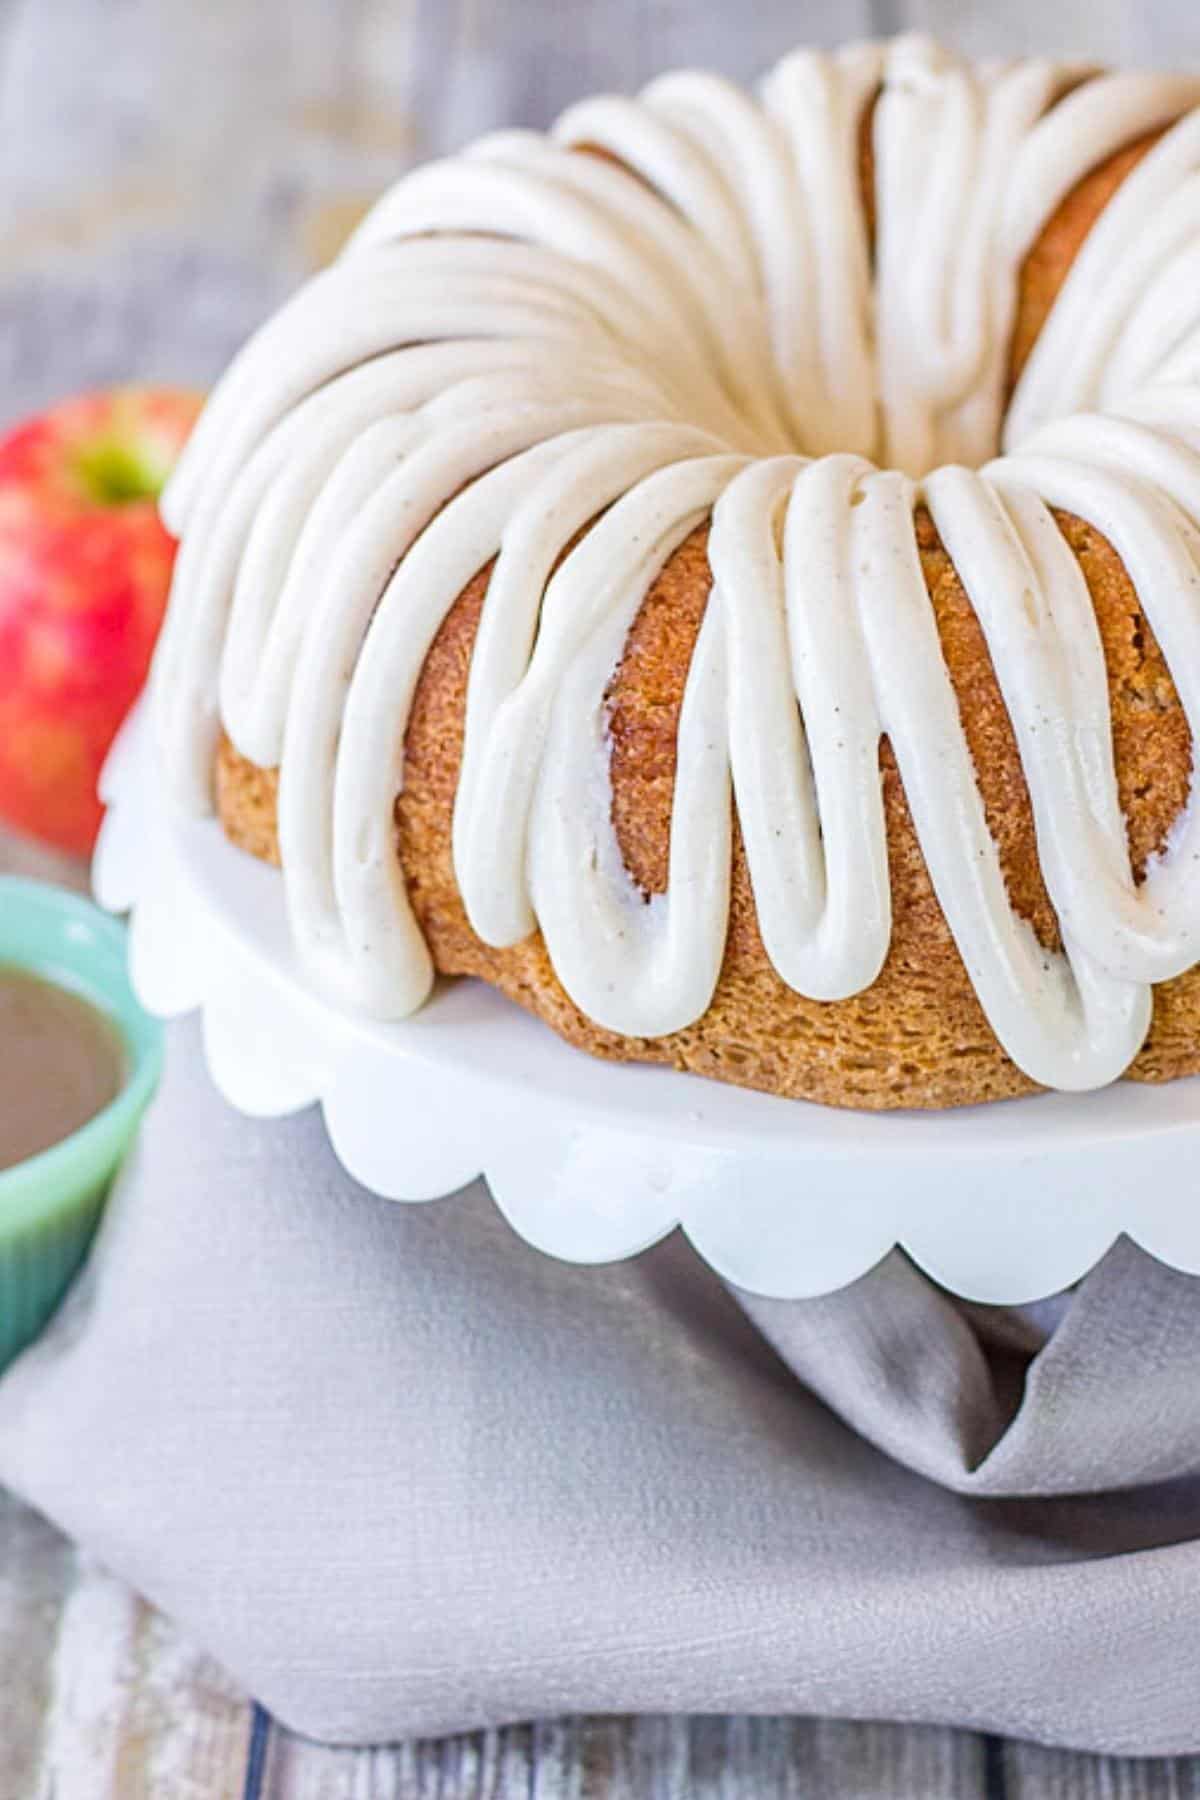 Piped icing on a bundt cake.